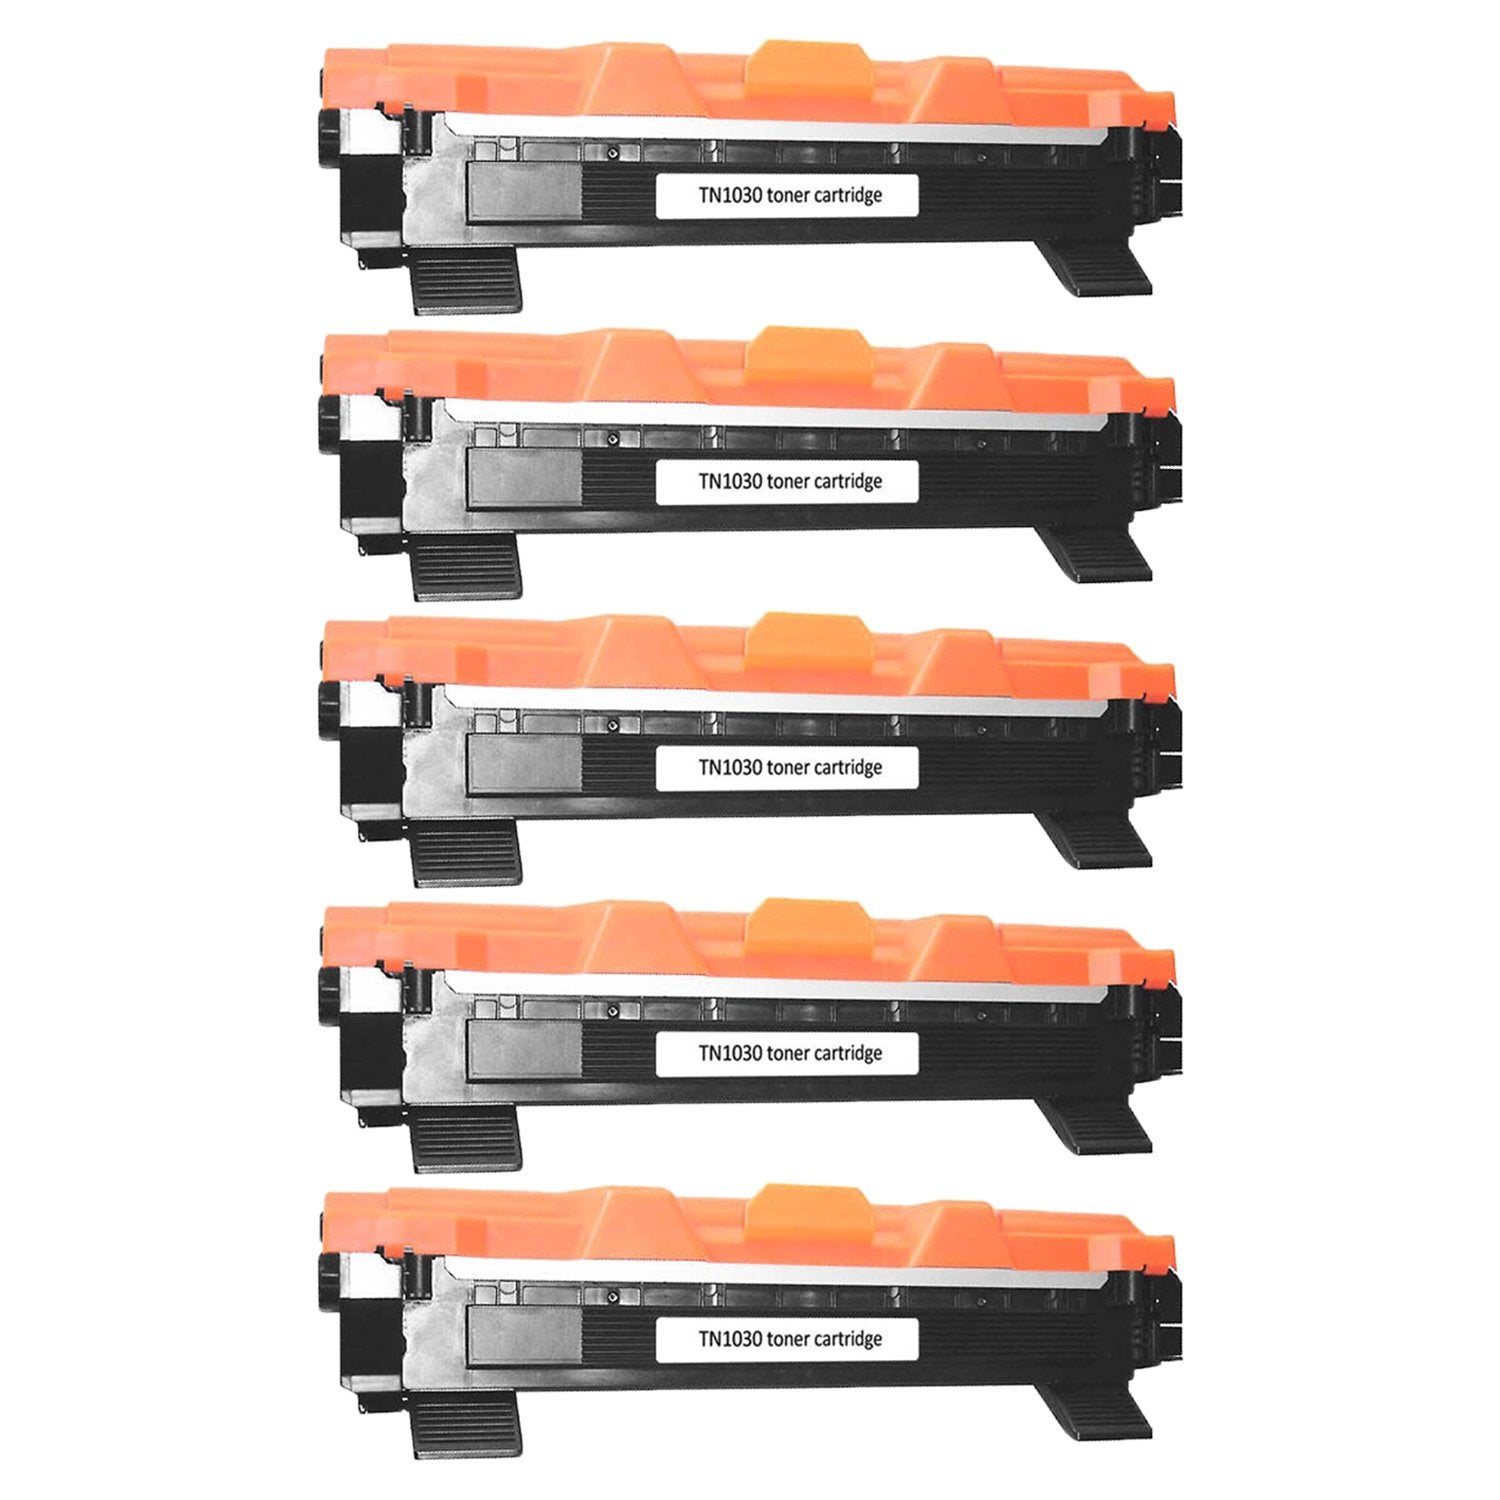 Absolute Toner Compatible Brother TN1030 Black Toner Cartridge | Absolute Toner Brother Toner Cartridges